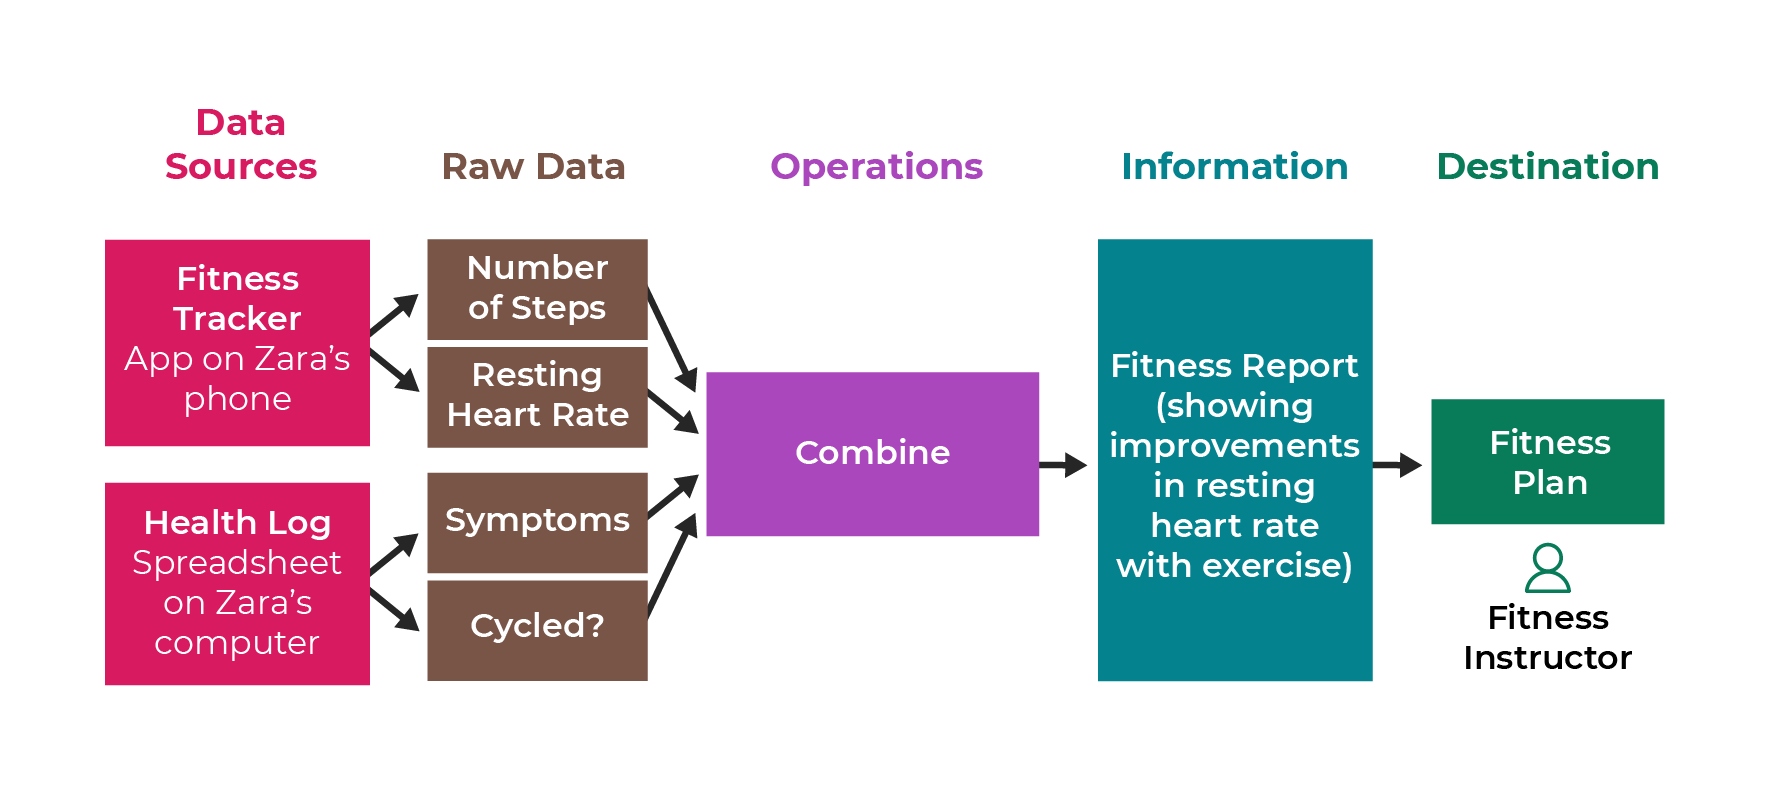 A picture shows the completed version of the previous data pipeline for Zara with Combine in Operations